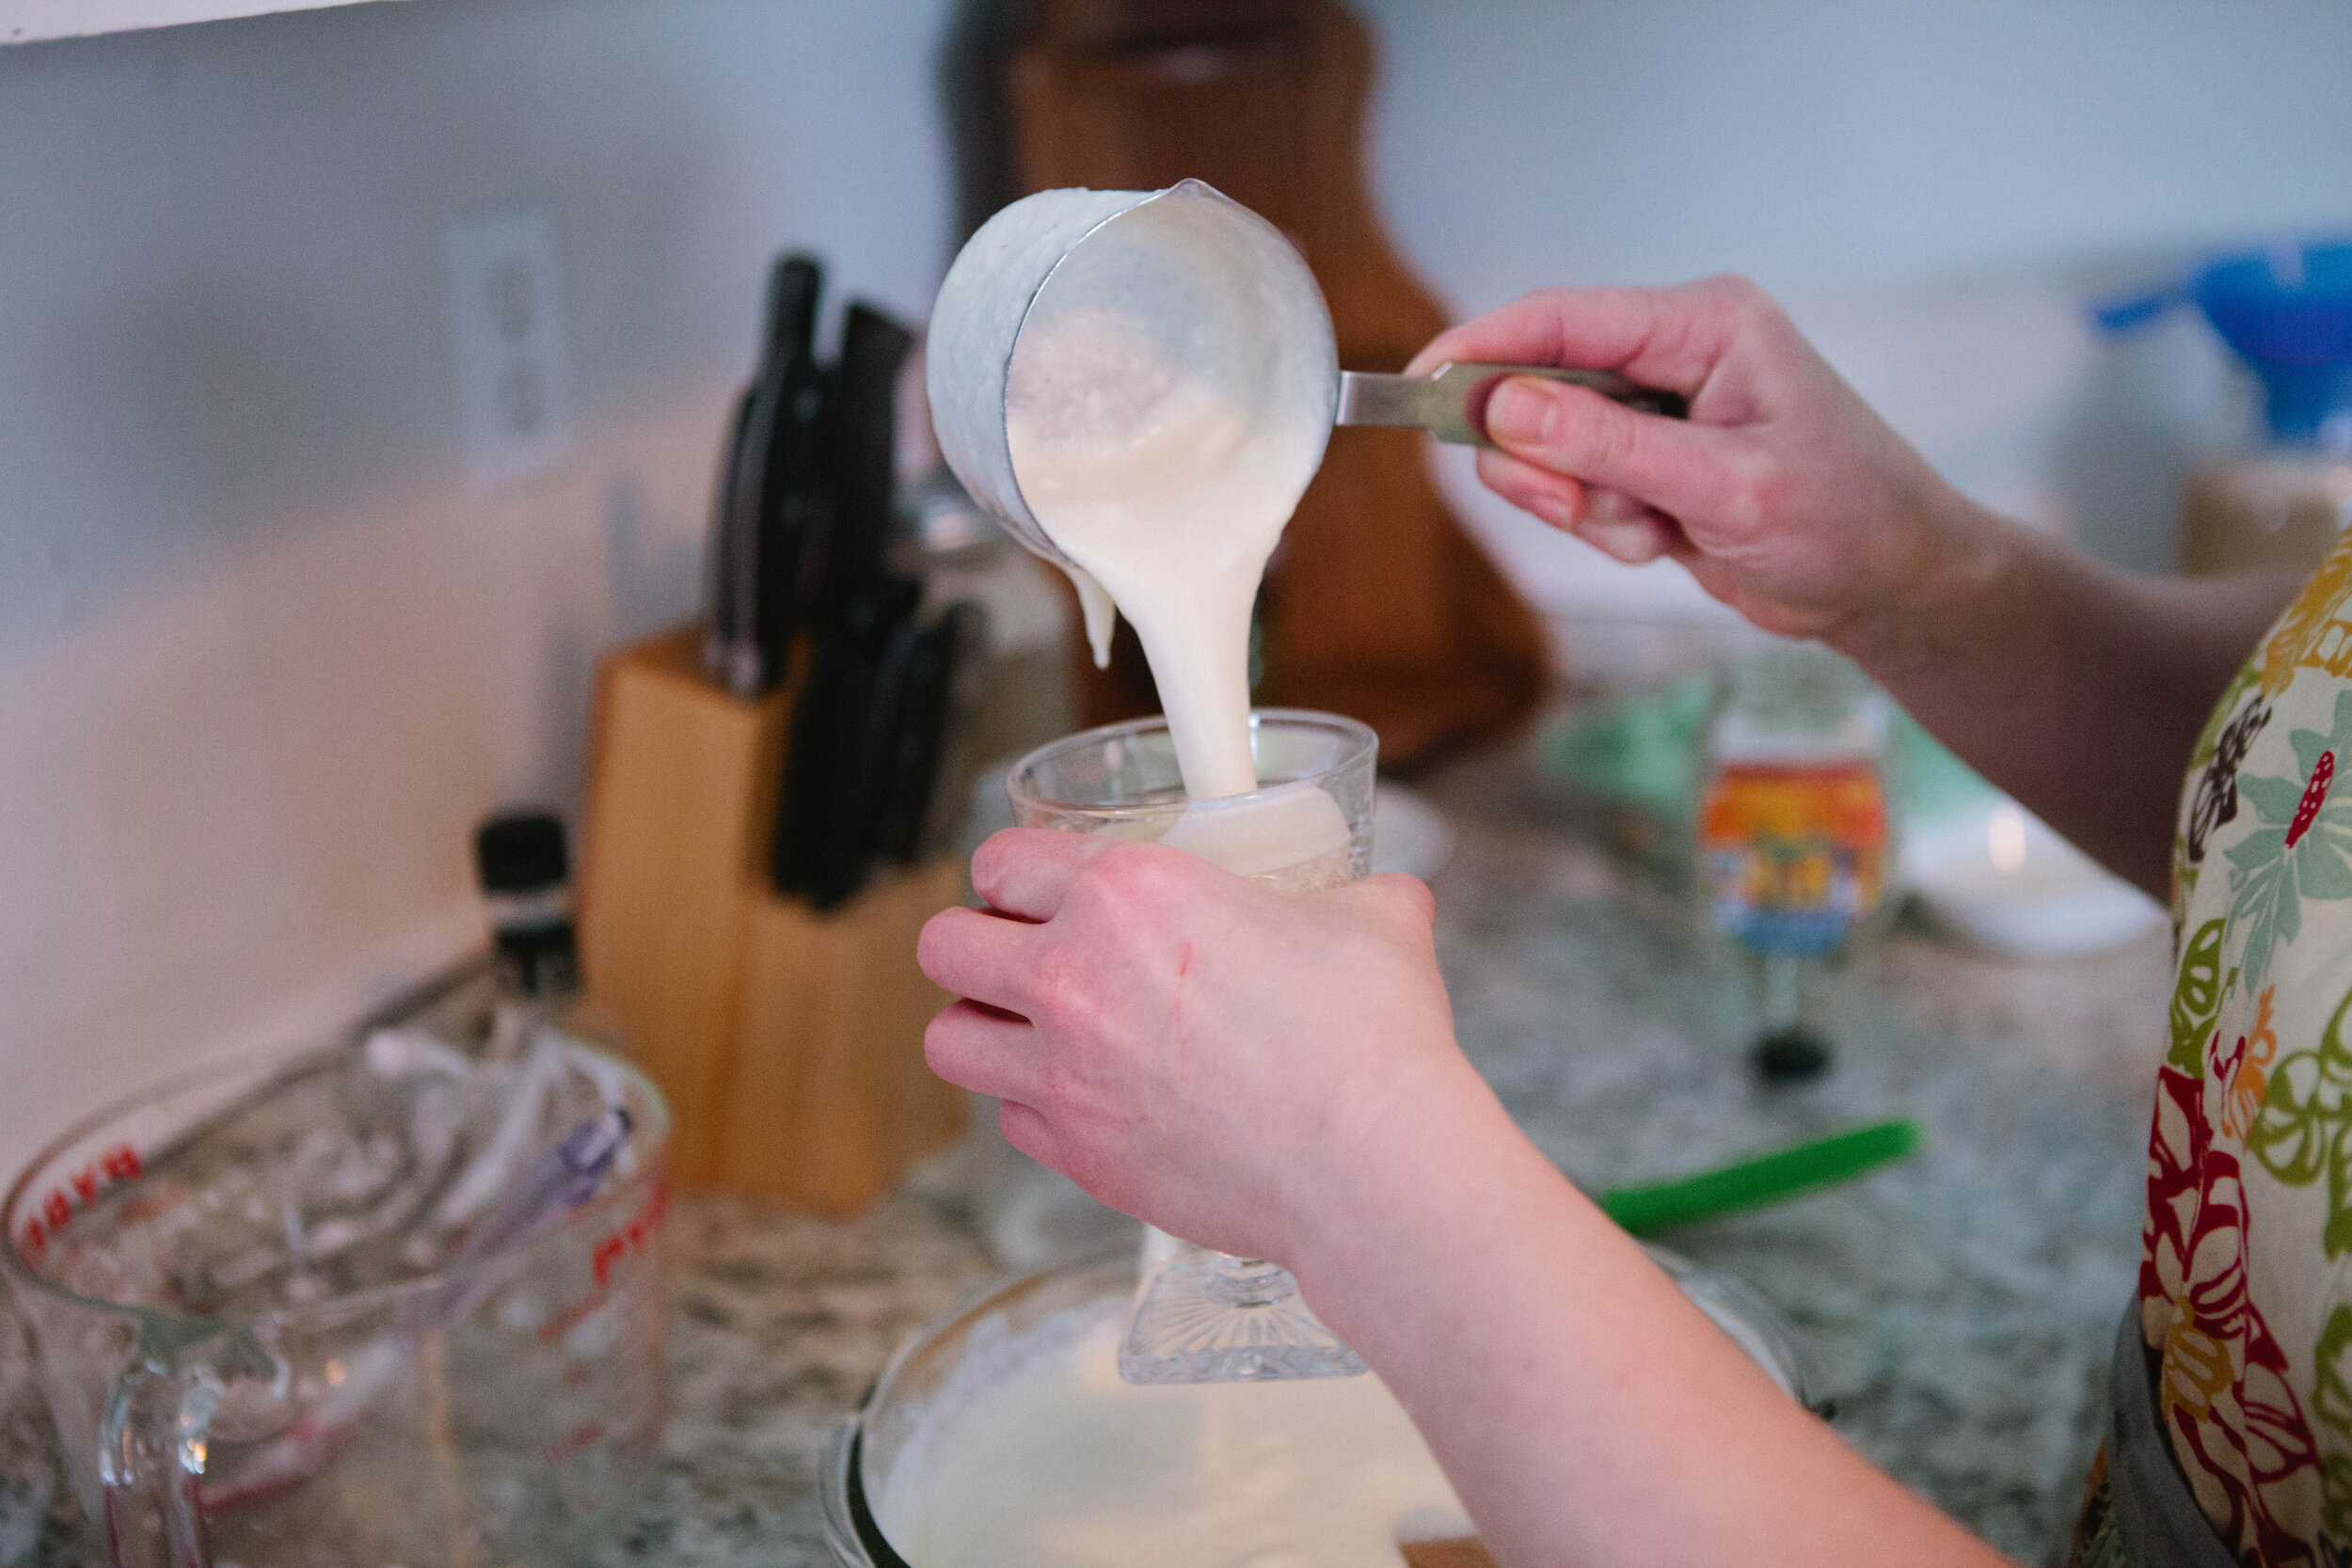 Learn to make your own eggnog from rawmilk. a recipe full of healthy fats! Recipe by Amy Mihaly, Certified GAPS Practitioner from Be Well Clinic, Loveland, Colorado.